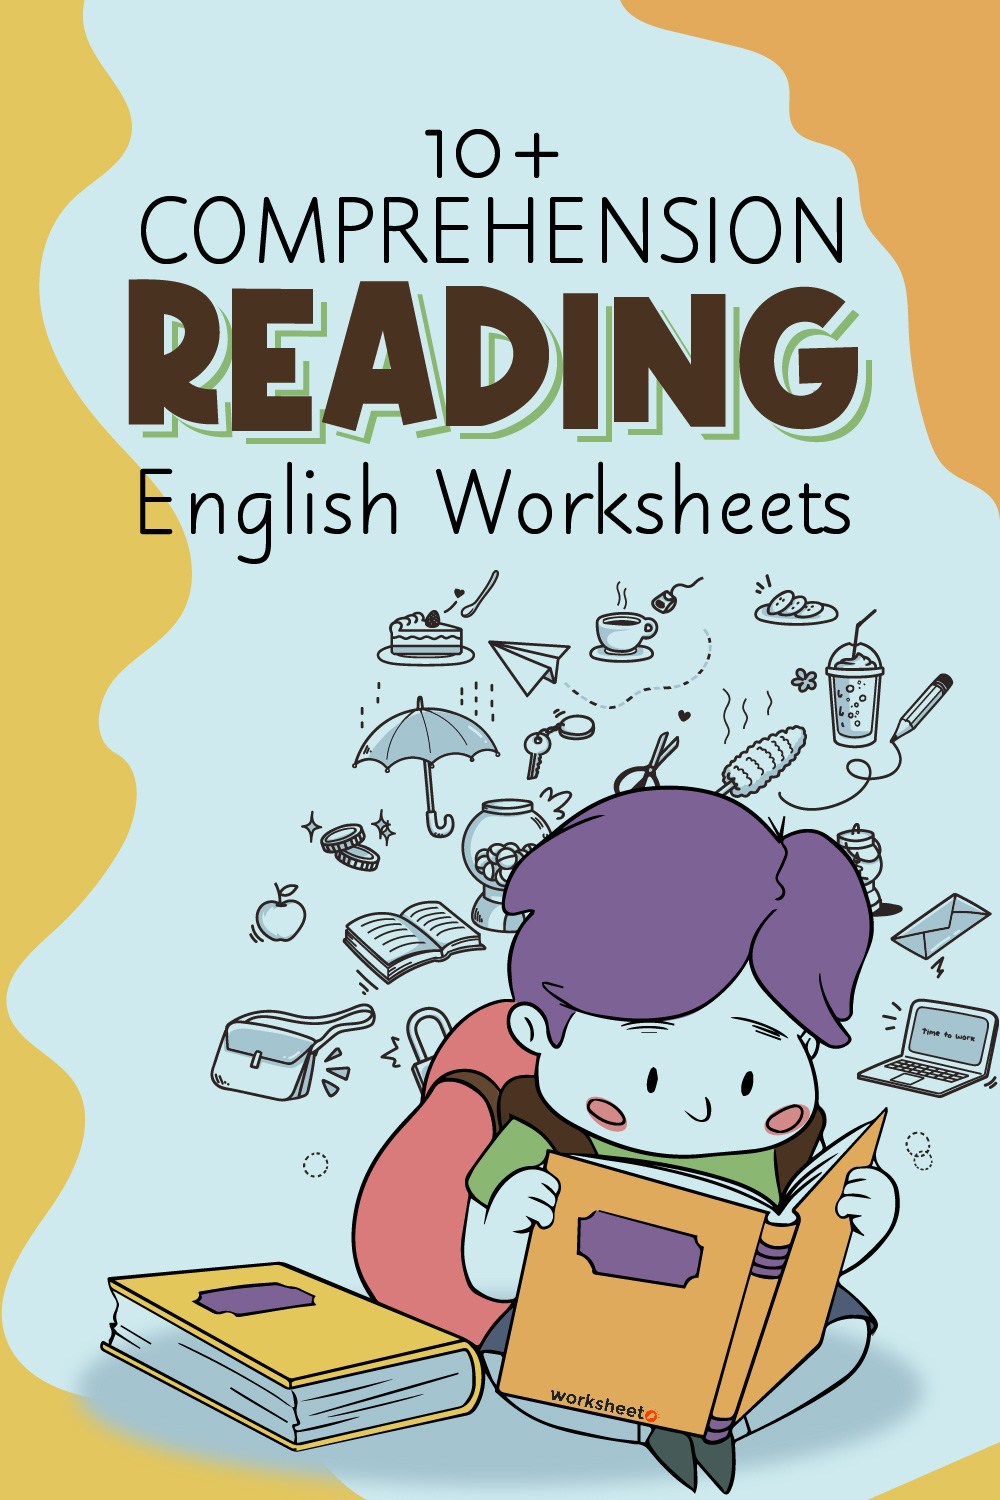 16 Images of Comprehension Reading English Worksheets